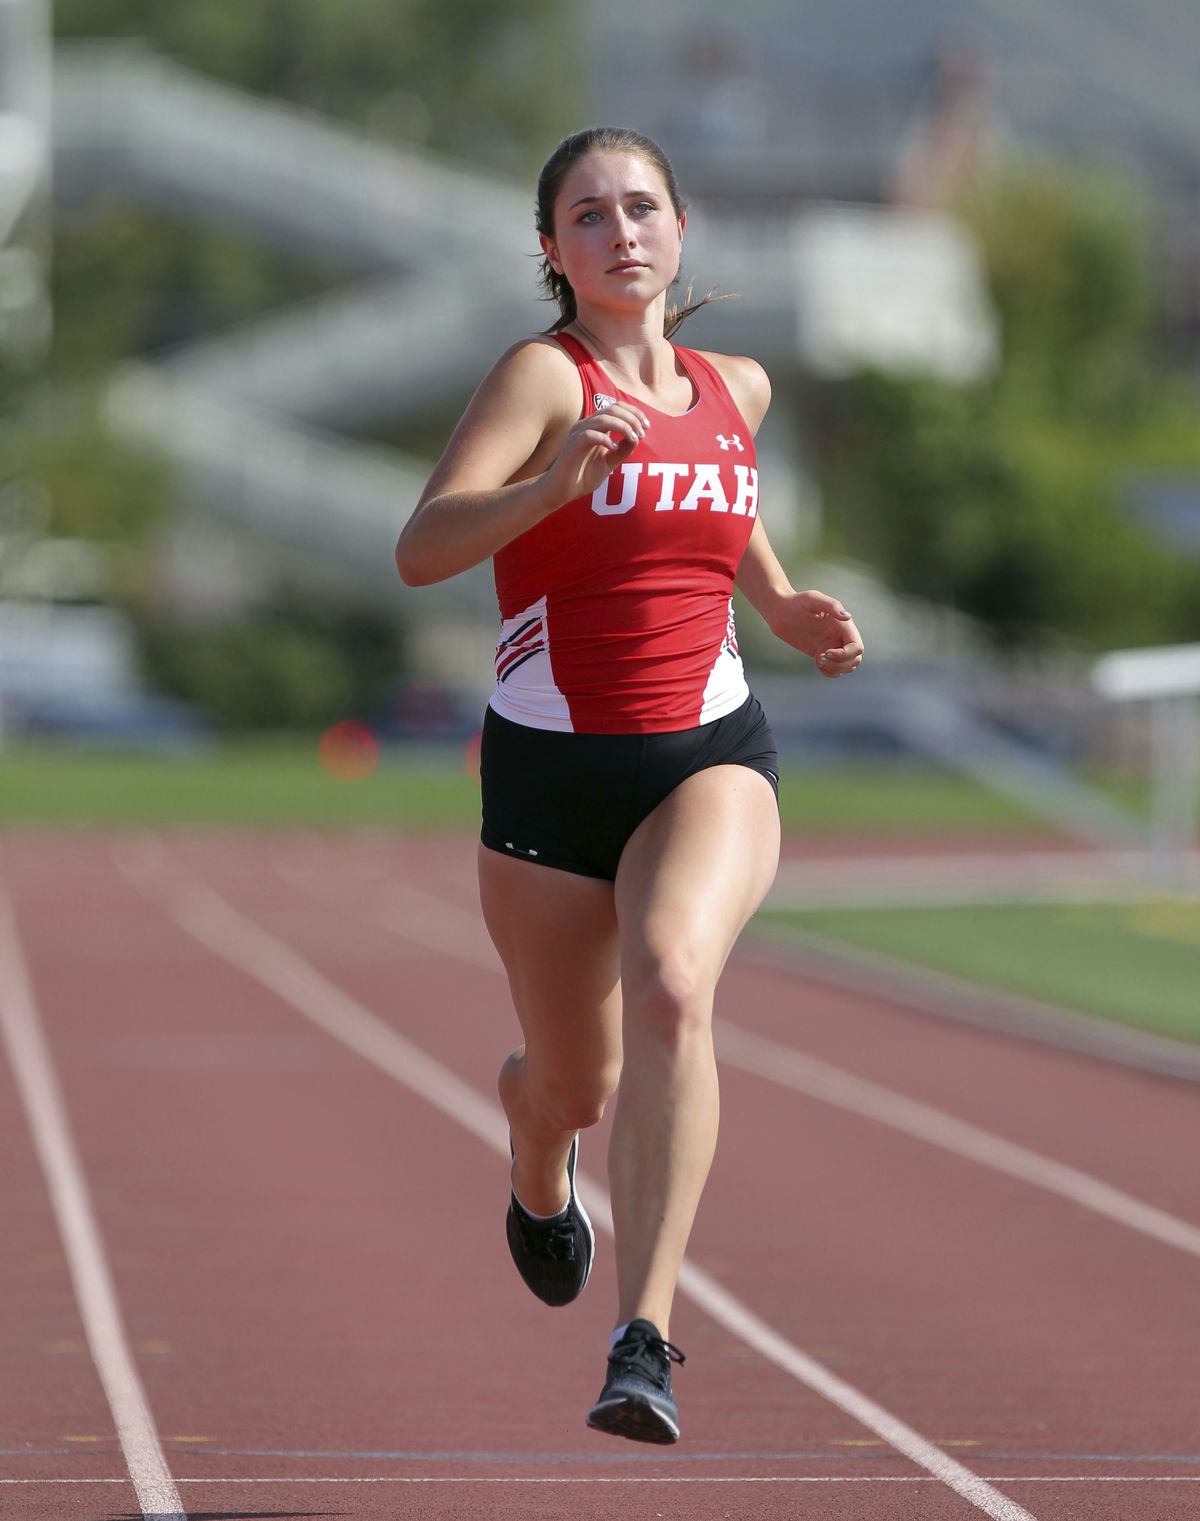 In this Aug. 30, 2017 photo, provided by the University of Utah, shows Lauren McCluskey, a member of the University of Utah cross country and track and field team, runs in Salt Lake City. McCluskey, a University of Utah student was shot and killed on camp